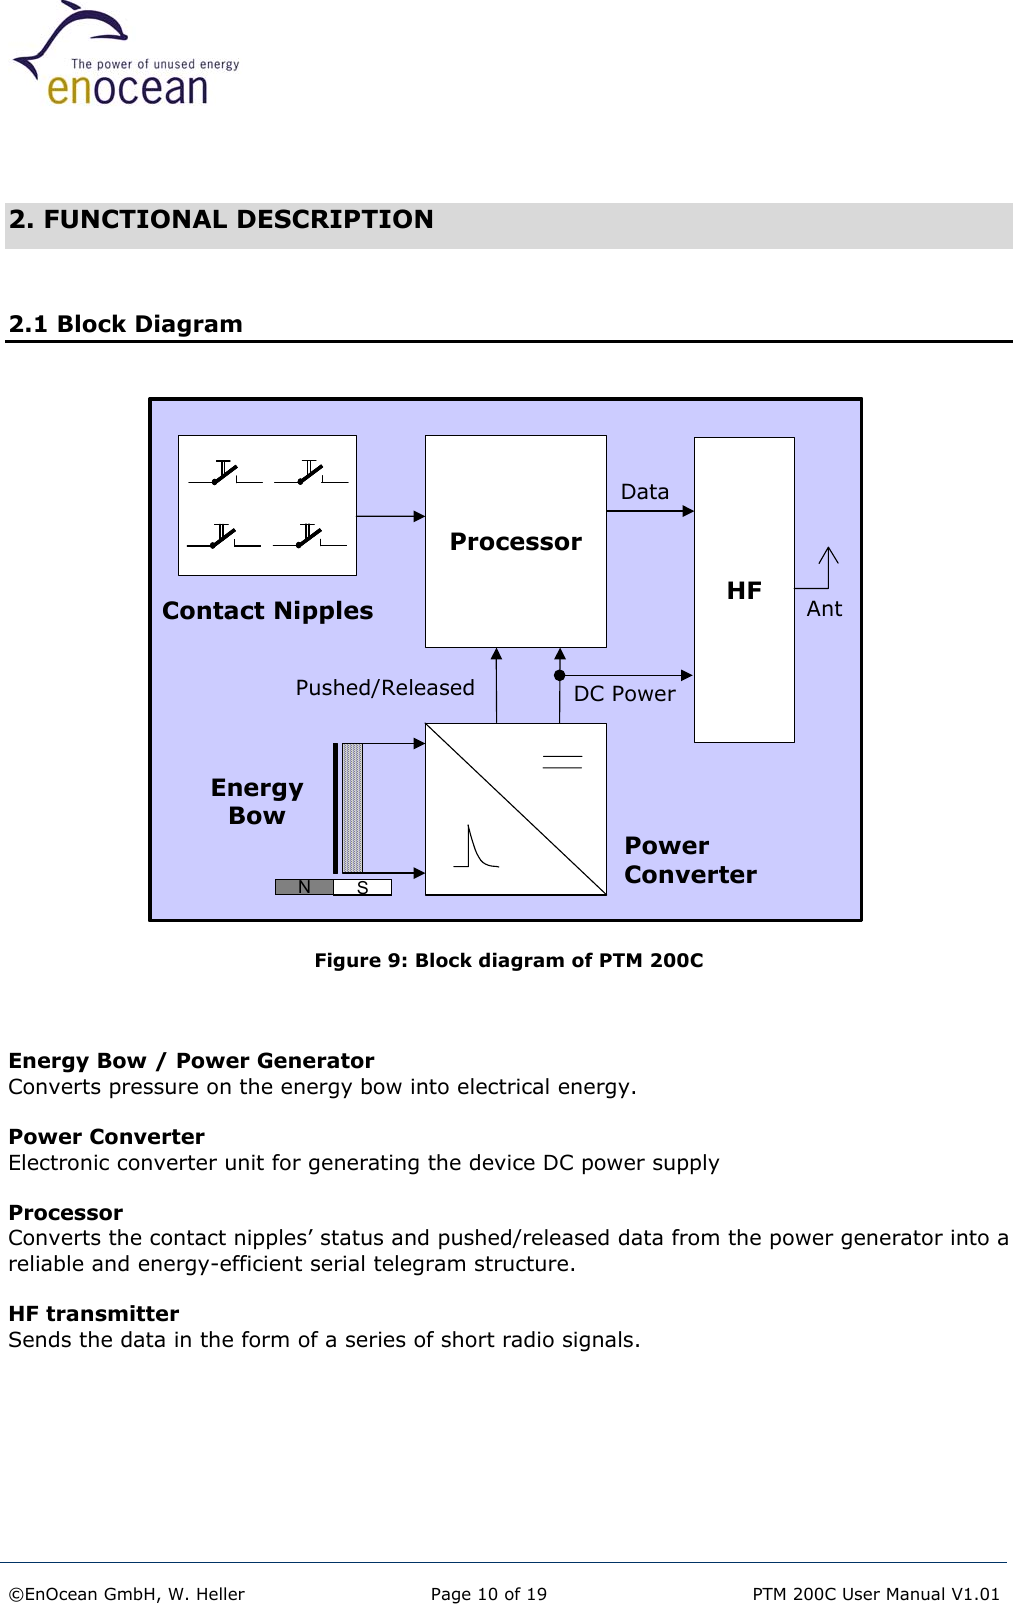    2. FUNCTIONAL DESCRIPTION  2.1 Block Diagram  ProcessorHFContact NipplesEnergyBowPowerConverterDataDC PowerPushed/ReleasedAntNSProcessorHFContact NipplesEnergyBowPowerConverterDataDC PowerPushed/ReleasedAntNSNS Figure 9: Block diagram of PTM 200C    Energy Bow / Power Generator Converts pressure on the energy bow into electrical energy.  Power Converter Electronic converter unit for generating the device DC power supply  Processor Converts the contact nipples’ status and pushed/released data from the power generator into a reliable and energy-efficient serial telegram structure.  HF transmitter Sends the data in the form of a series of short radio signals.    ©EnOcean GmbH, W. Heller  Page 10 of 19   PTM 200C User Manual V1.01  